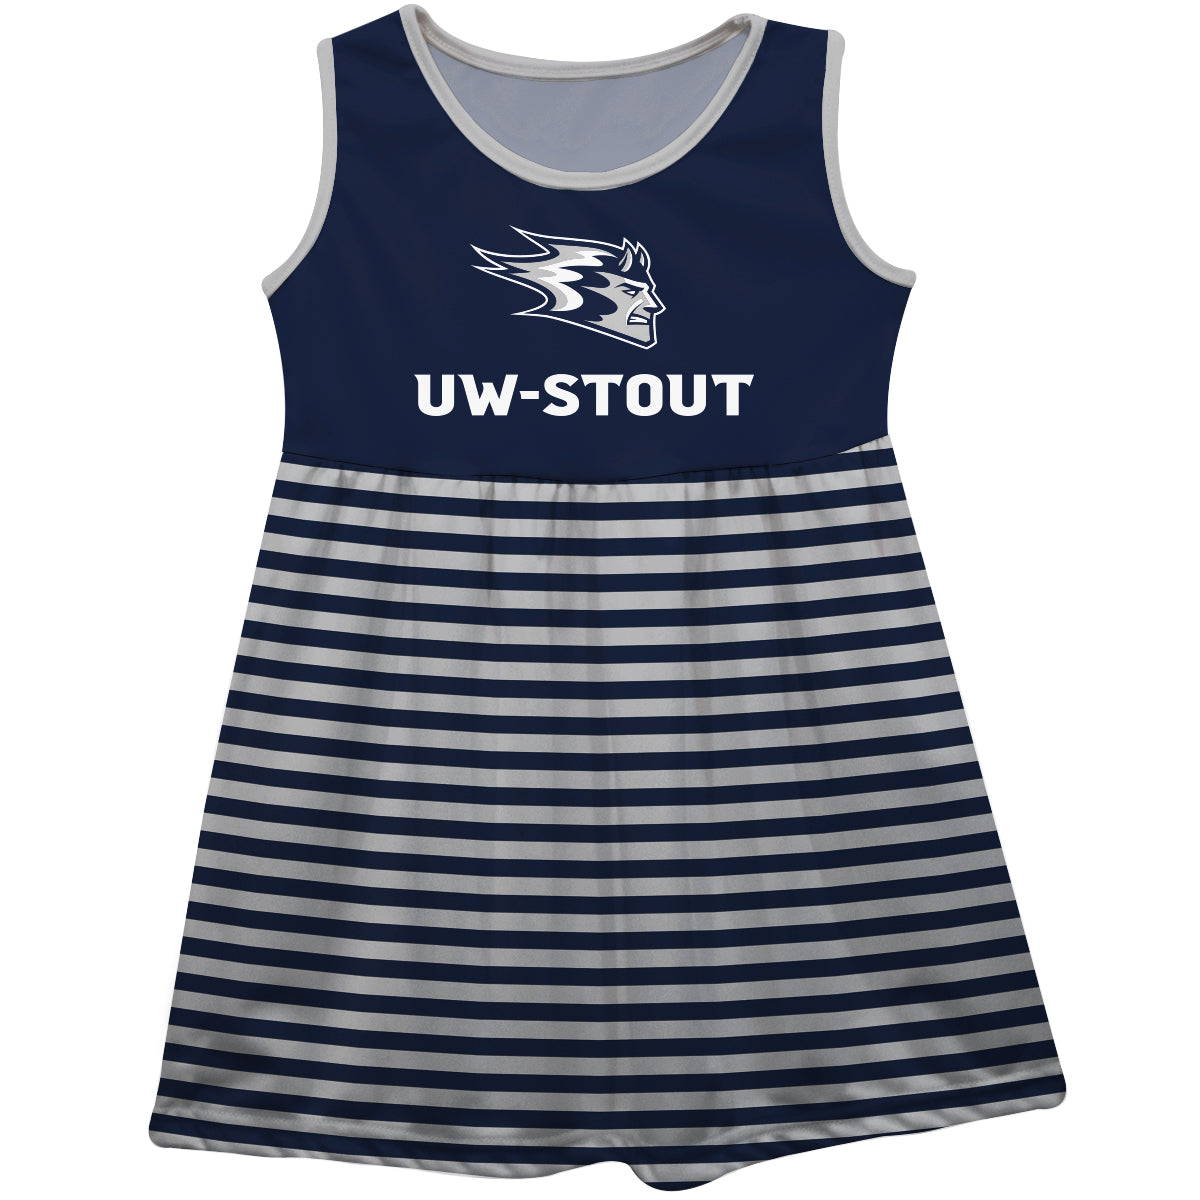 University of Wisconsin Stout Blue Devils UW Blue and White Sleeveless Tank Dress with Stripes on Skirt by Vive La Fete-Campus-Wardrobe